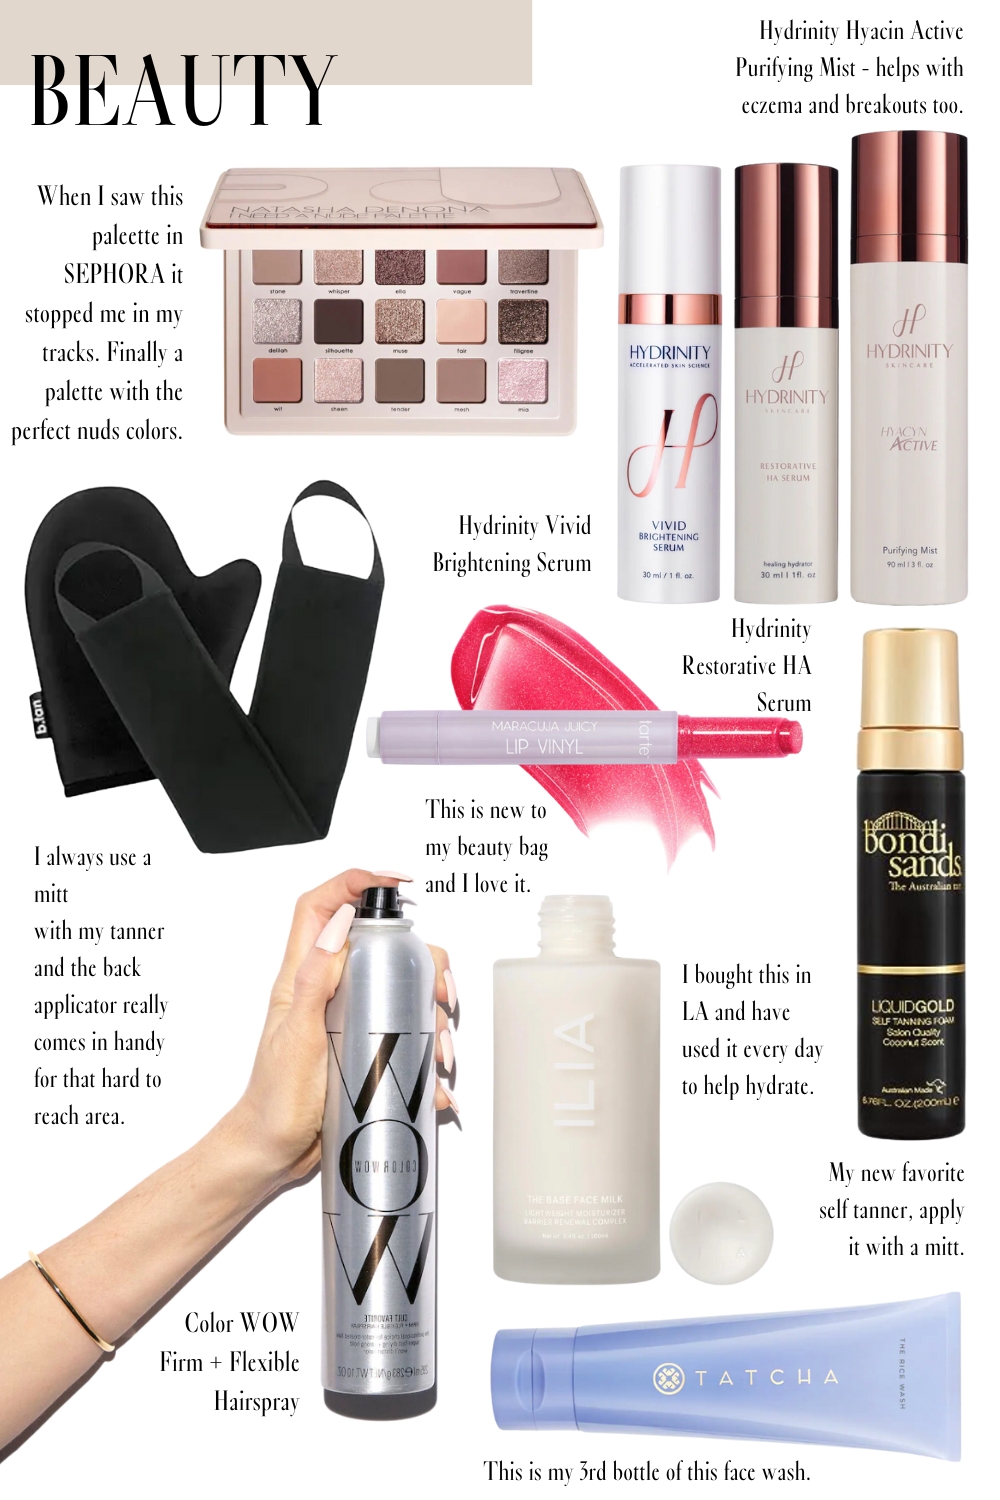 My beauty picks for the month include Tatcha cleanser, a lip balm, self tanner, Colorwow hair products